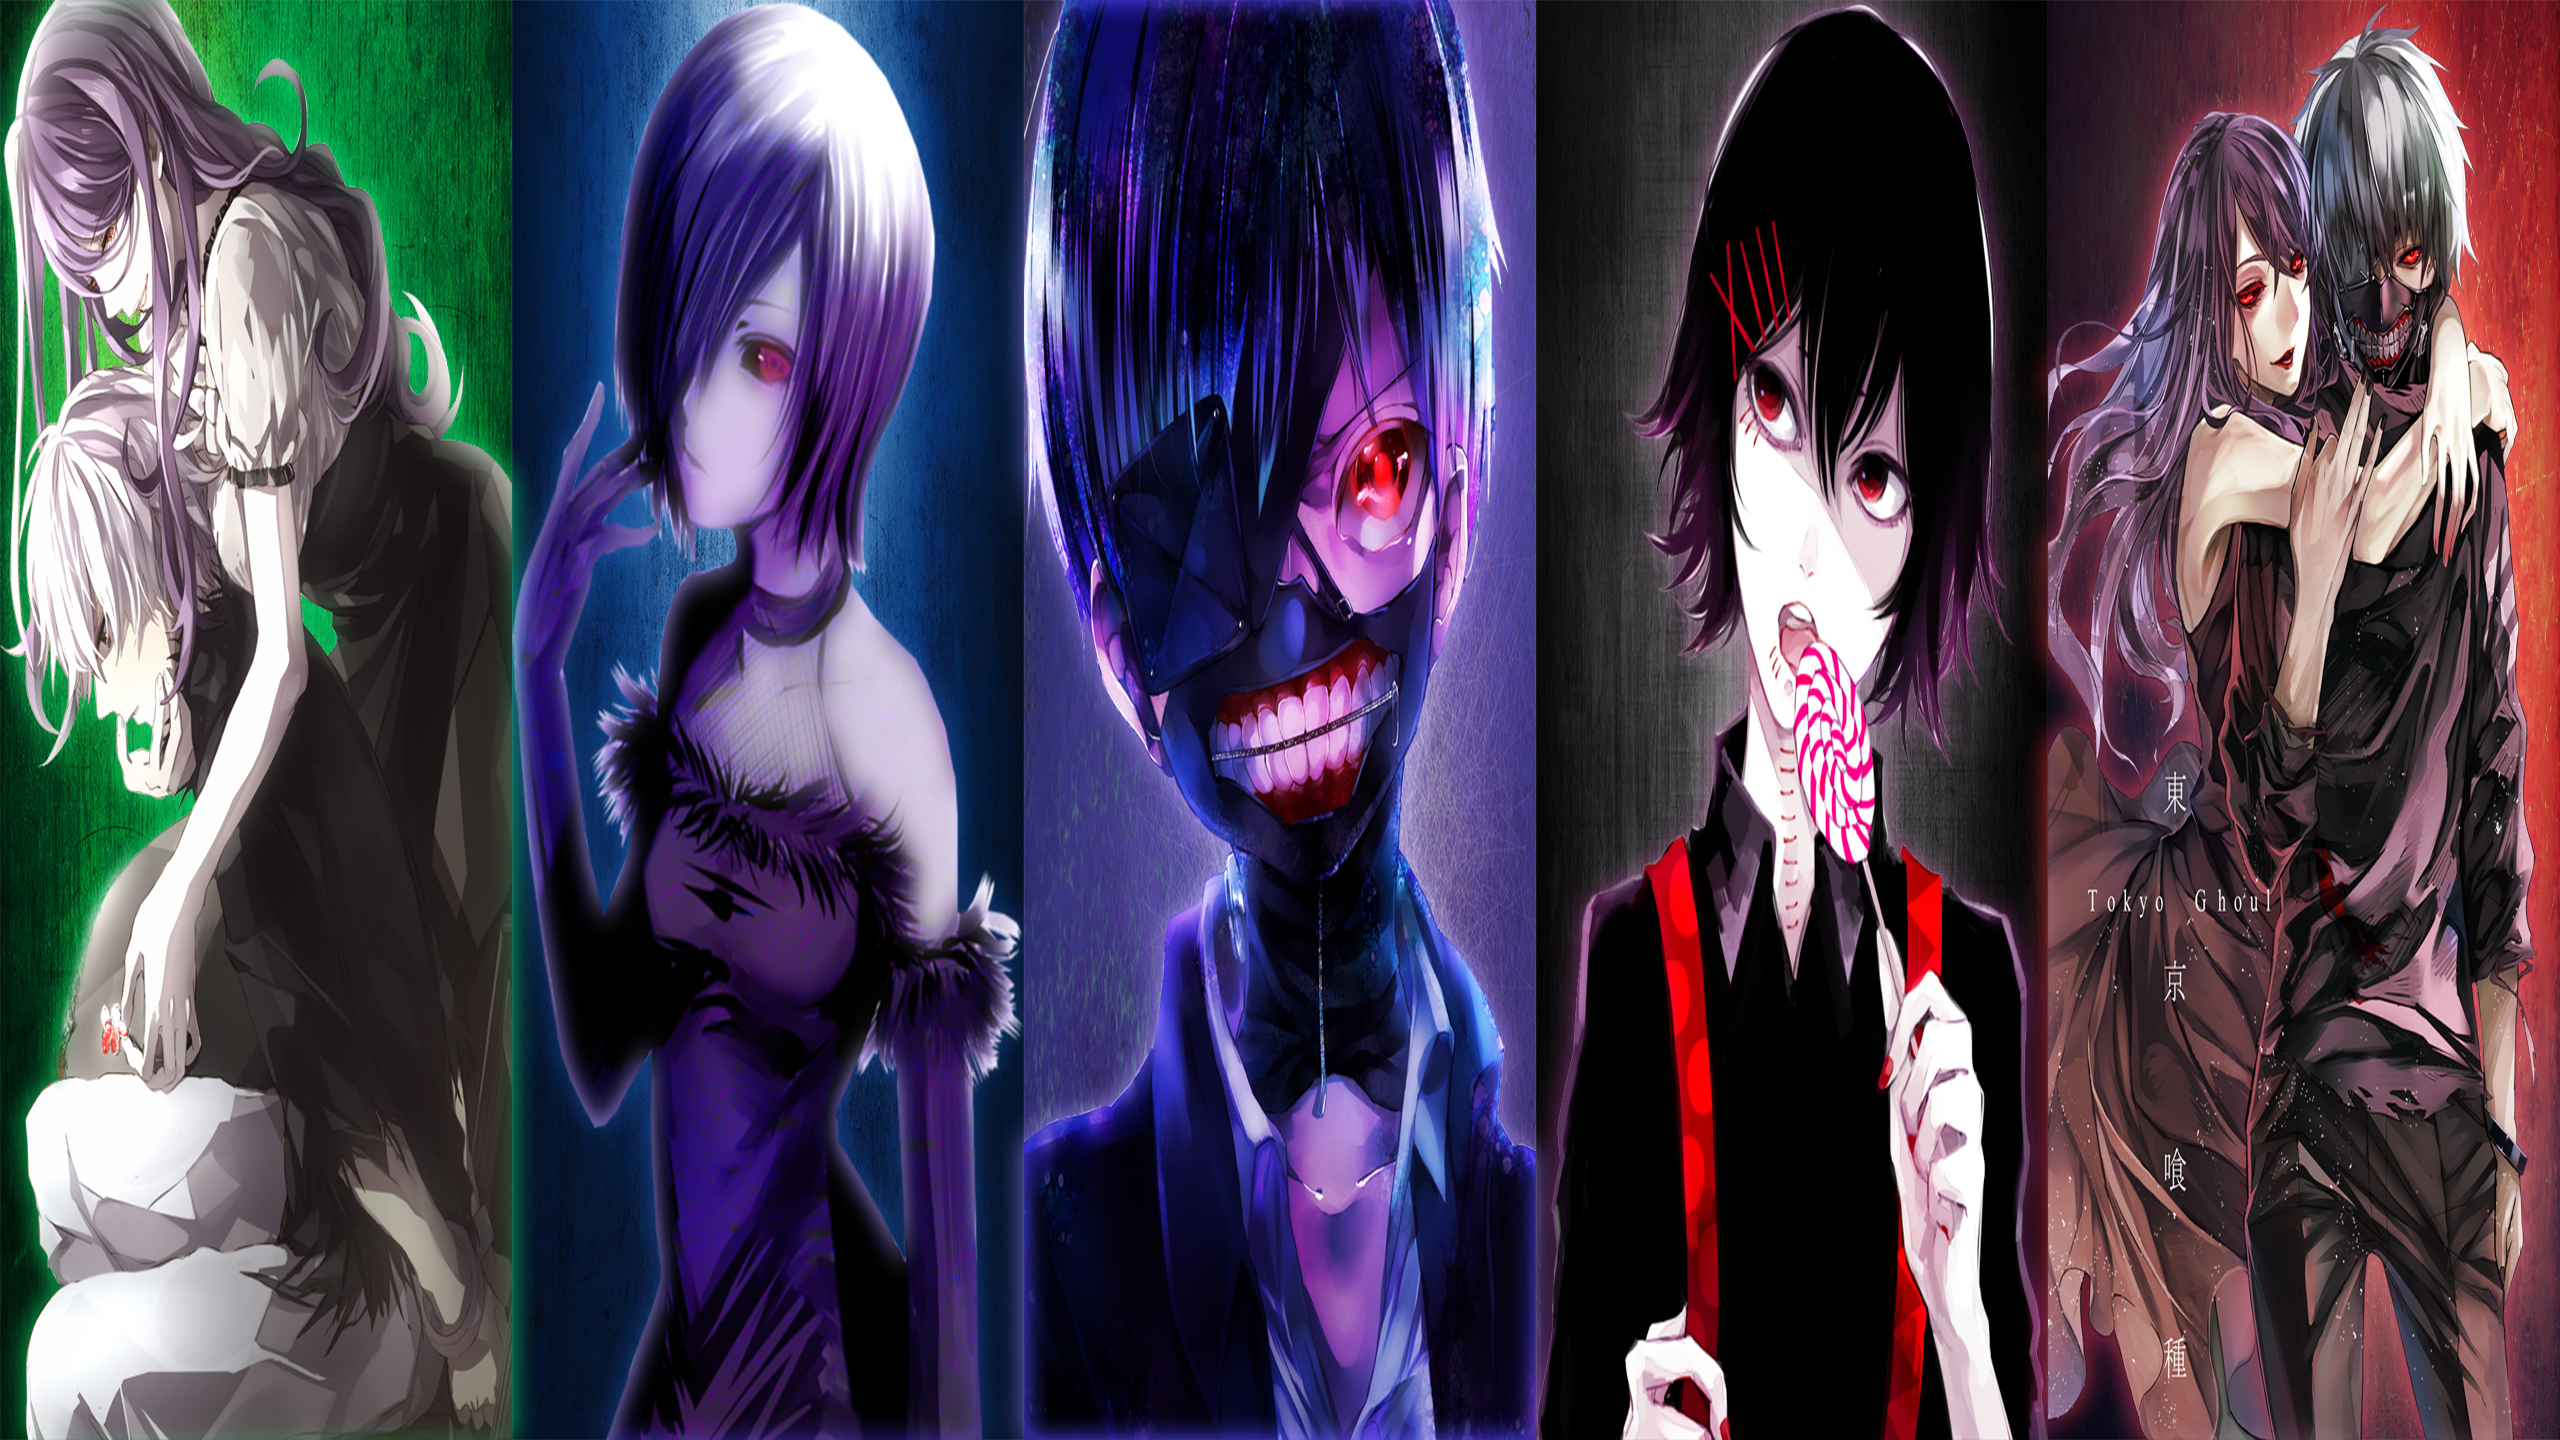 Anime Tokyo Ghoul Picture by Jostèr - Image Abyss